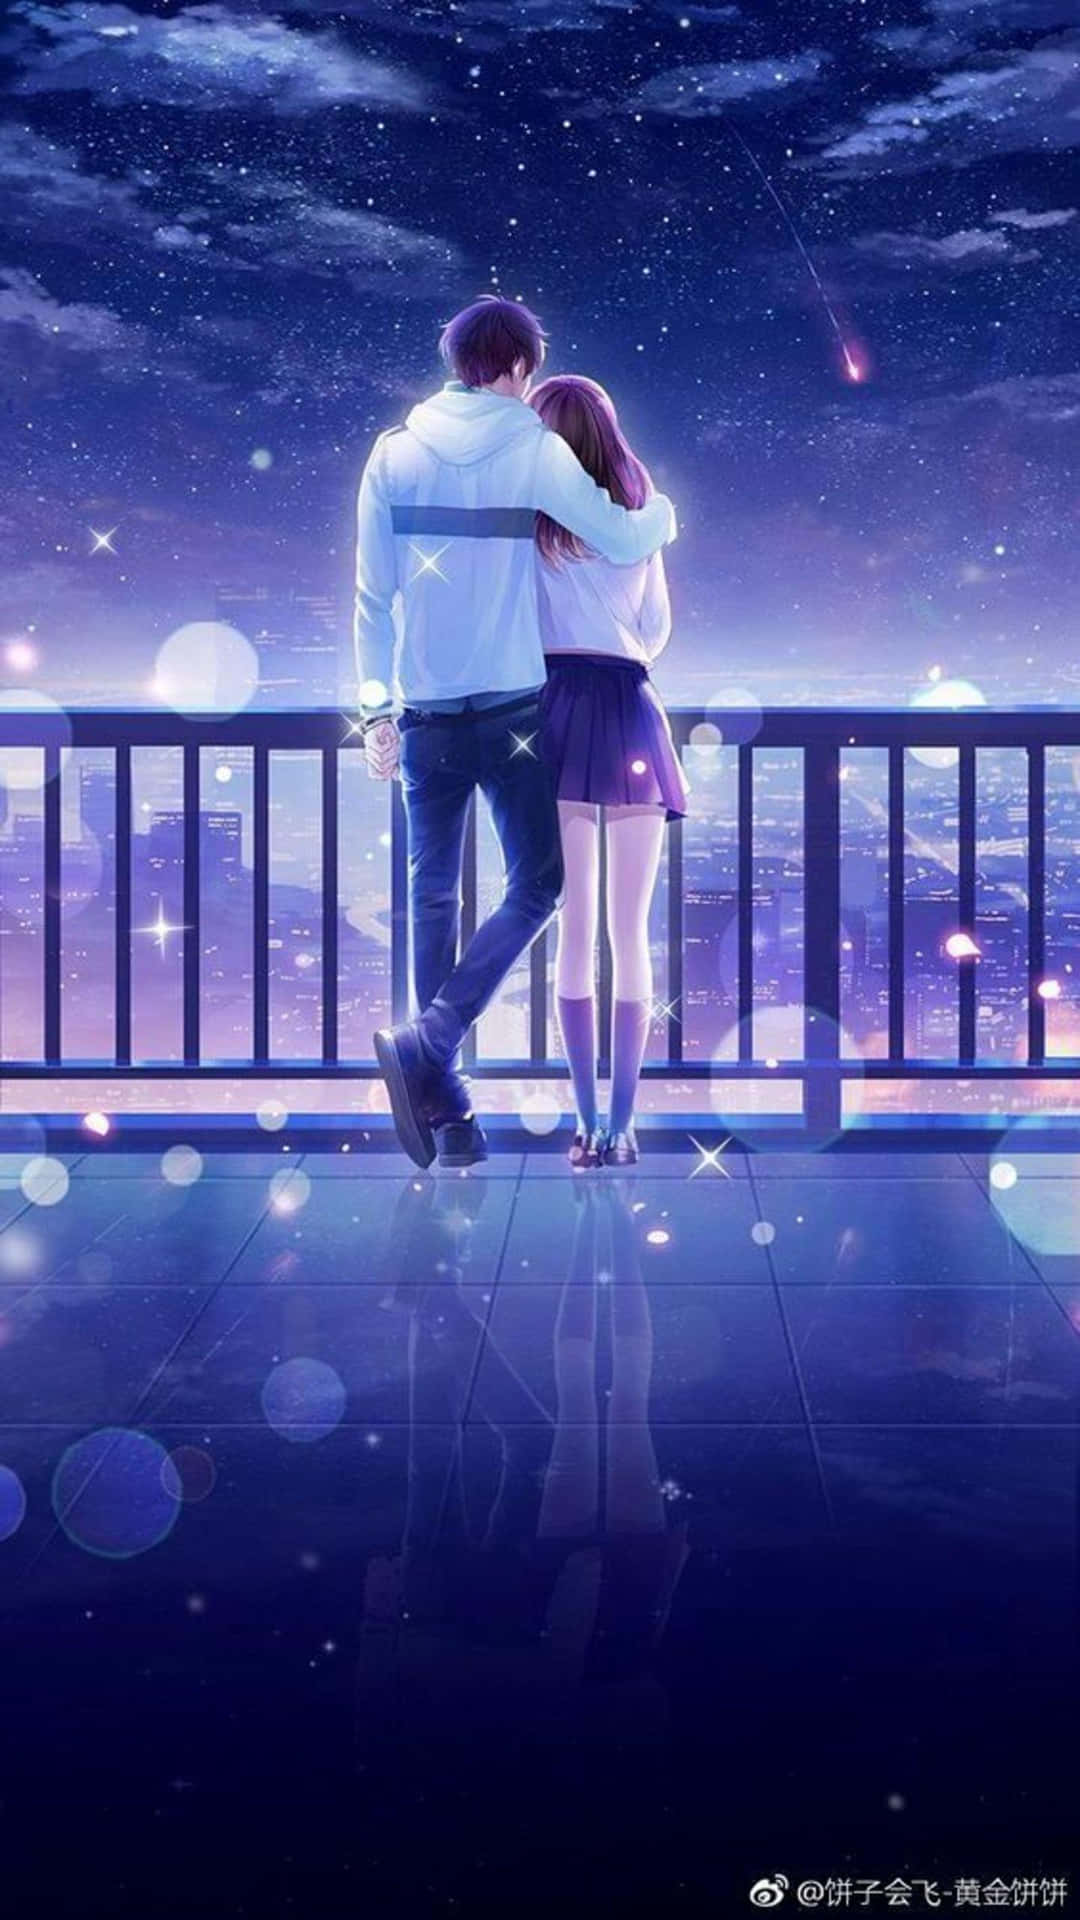 A Couple Standing On A Balcony With Stars In The Sky Background